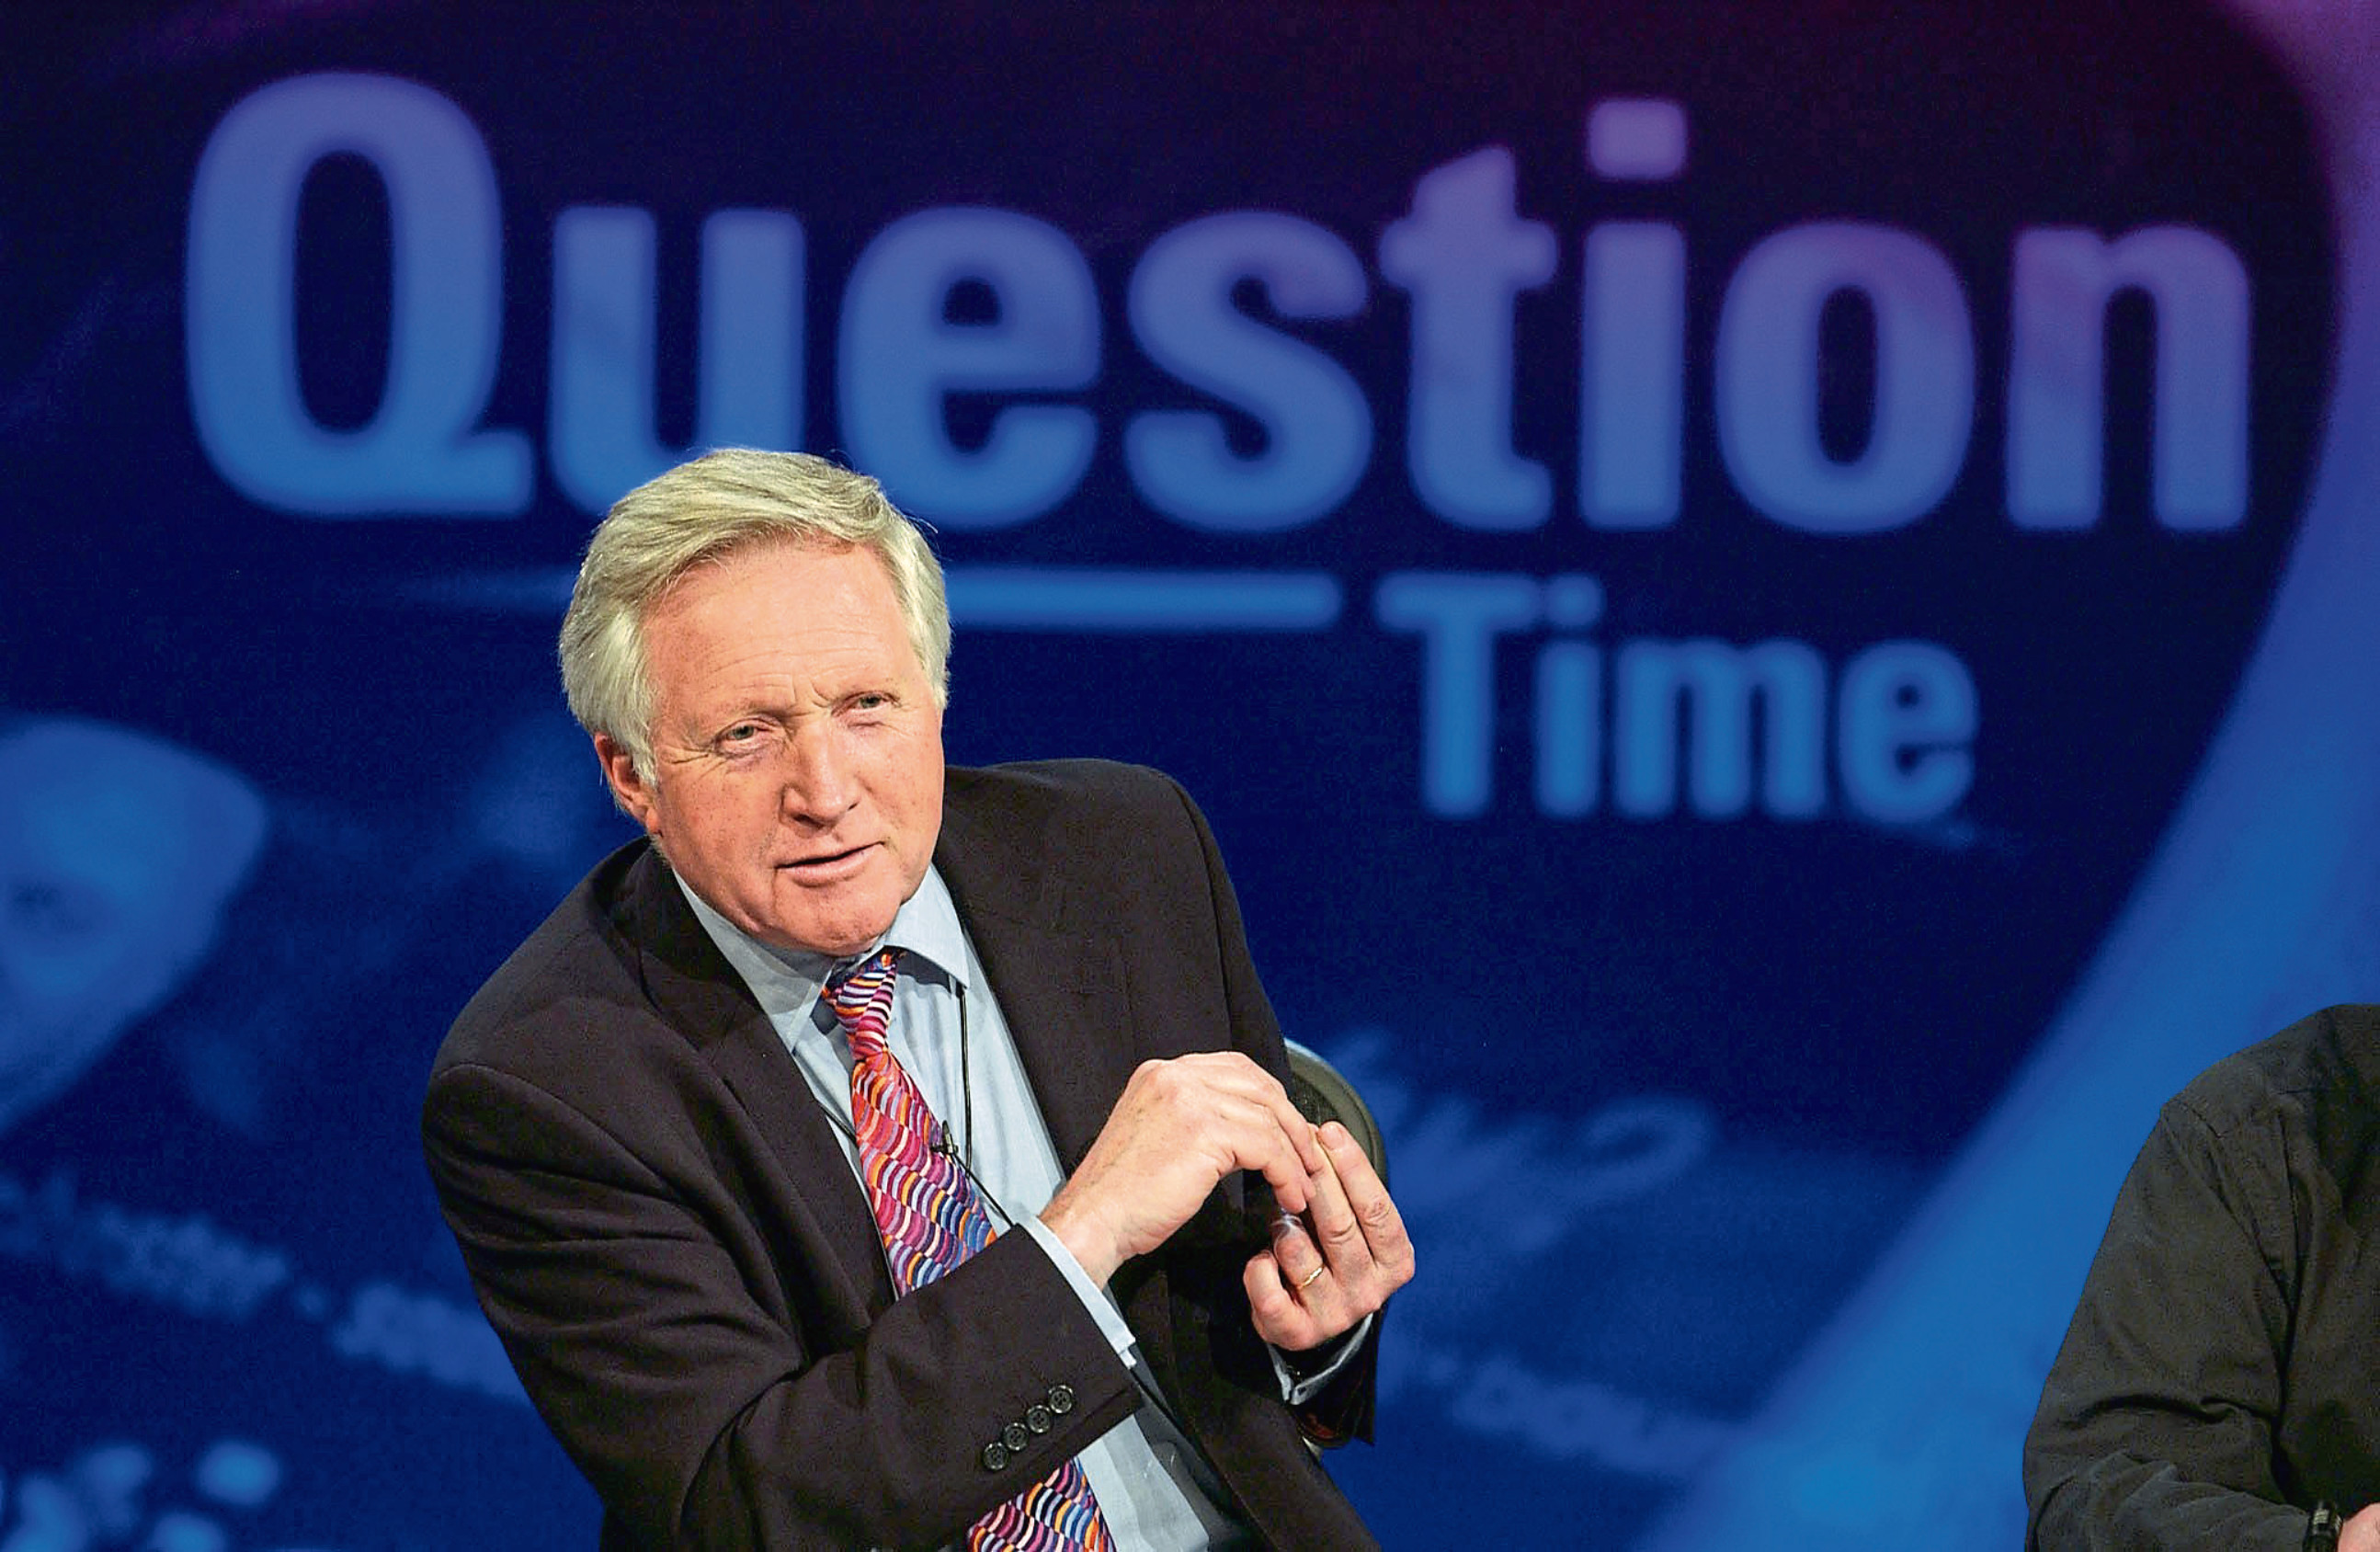 Picture showws - David Dimbleby on 'Question Time'. David Dimbleby invites the public to put key representatives on the hot seat and debate topical affairs. (Photo by Jeff Overs/BBC News & Current Affairs via Getty Images)